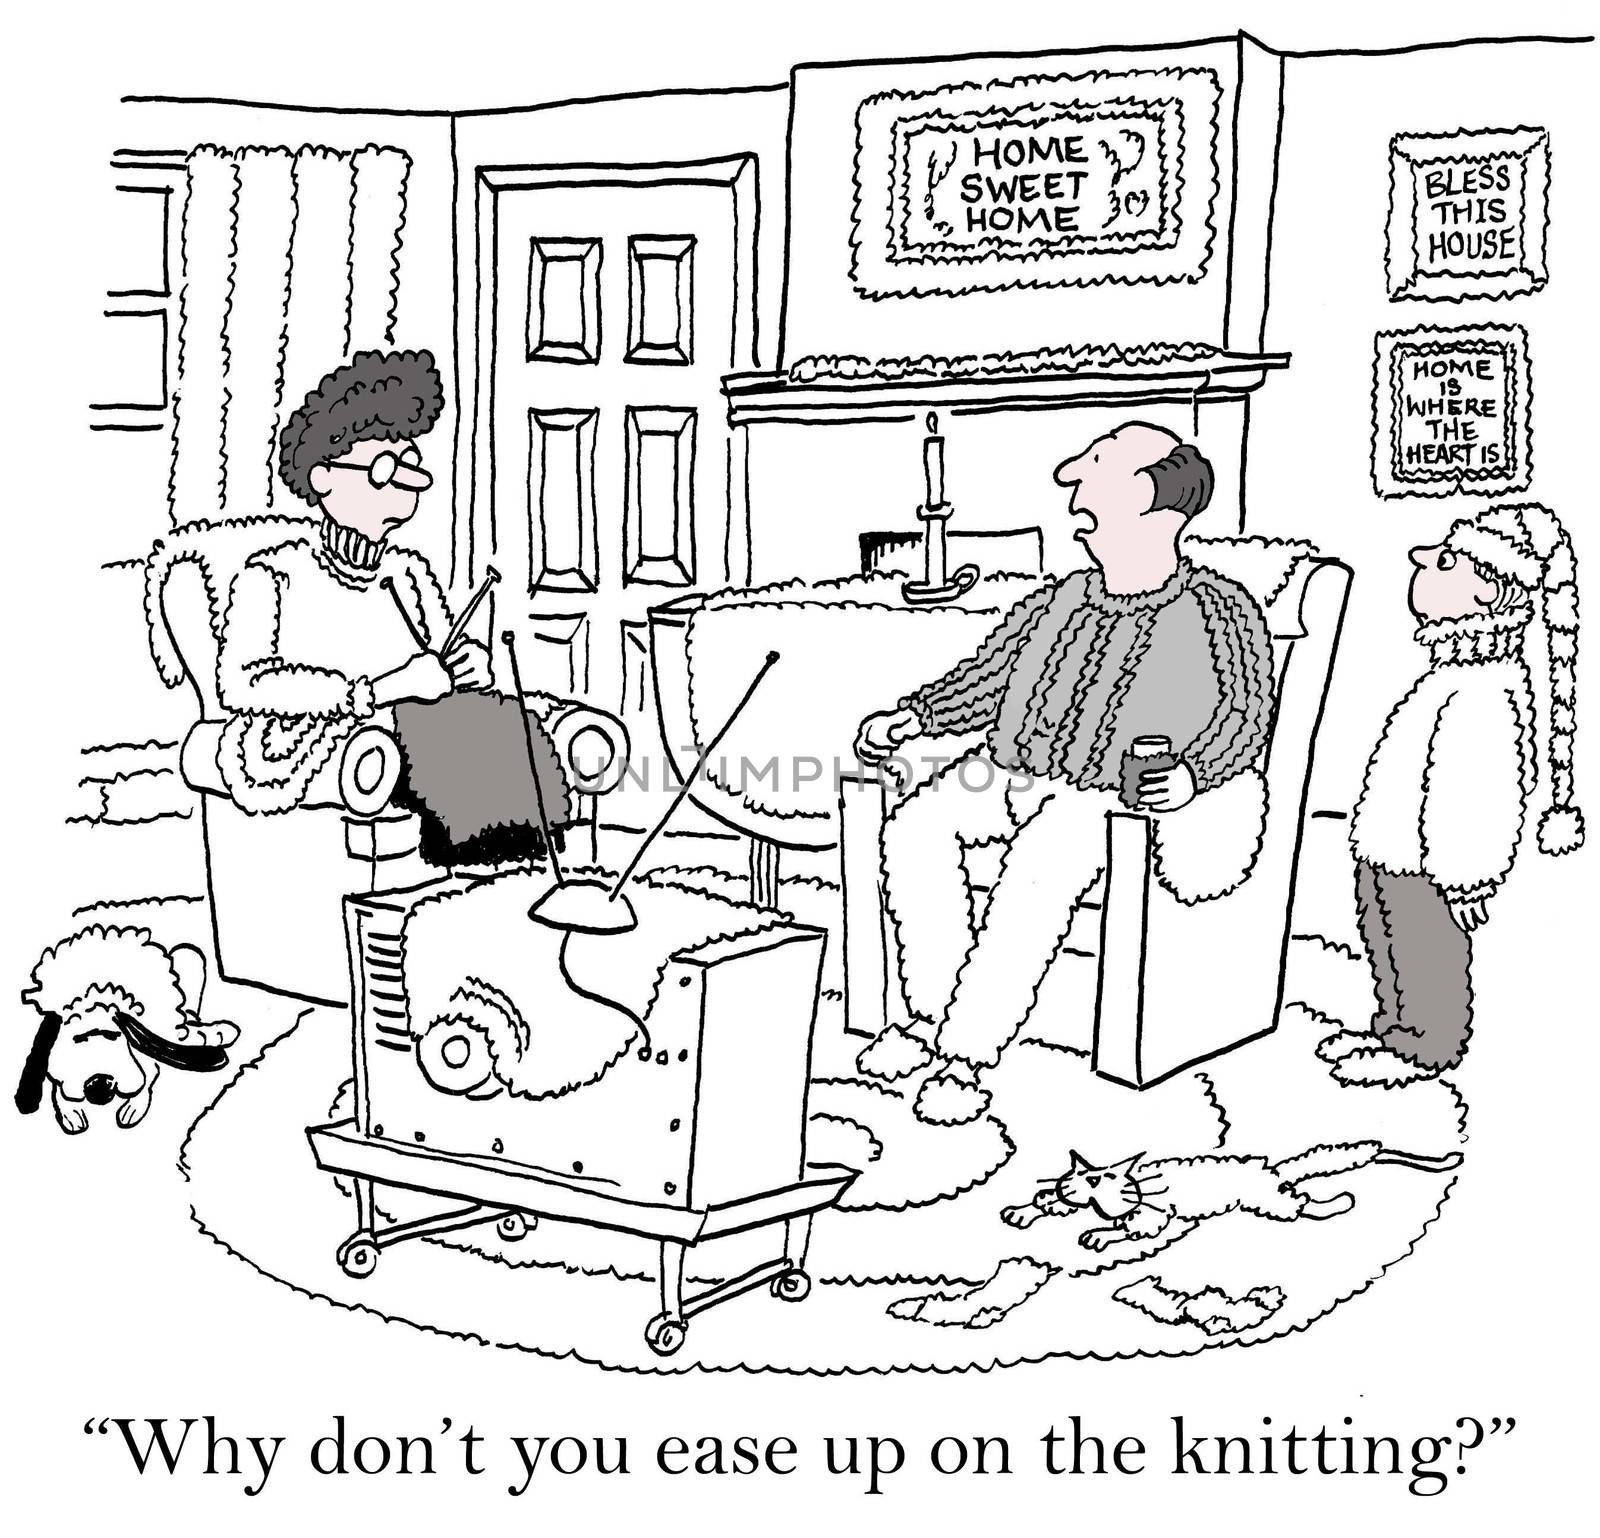 "Why don't you ease up on the knitting?"